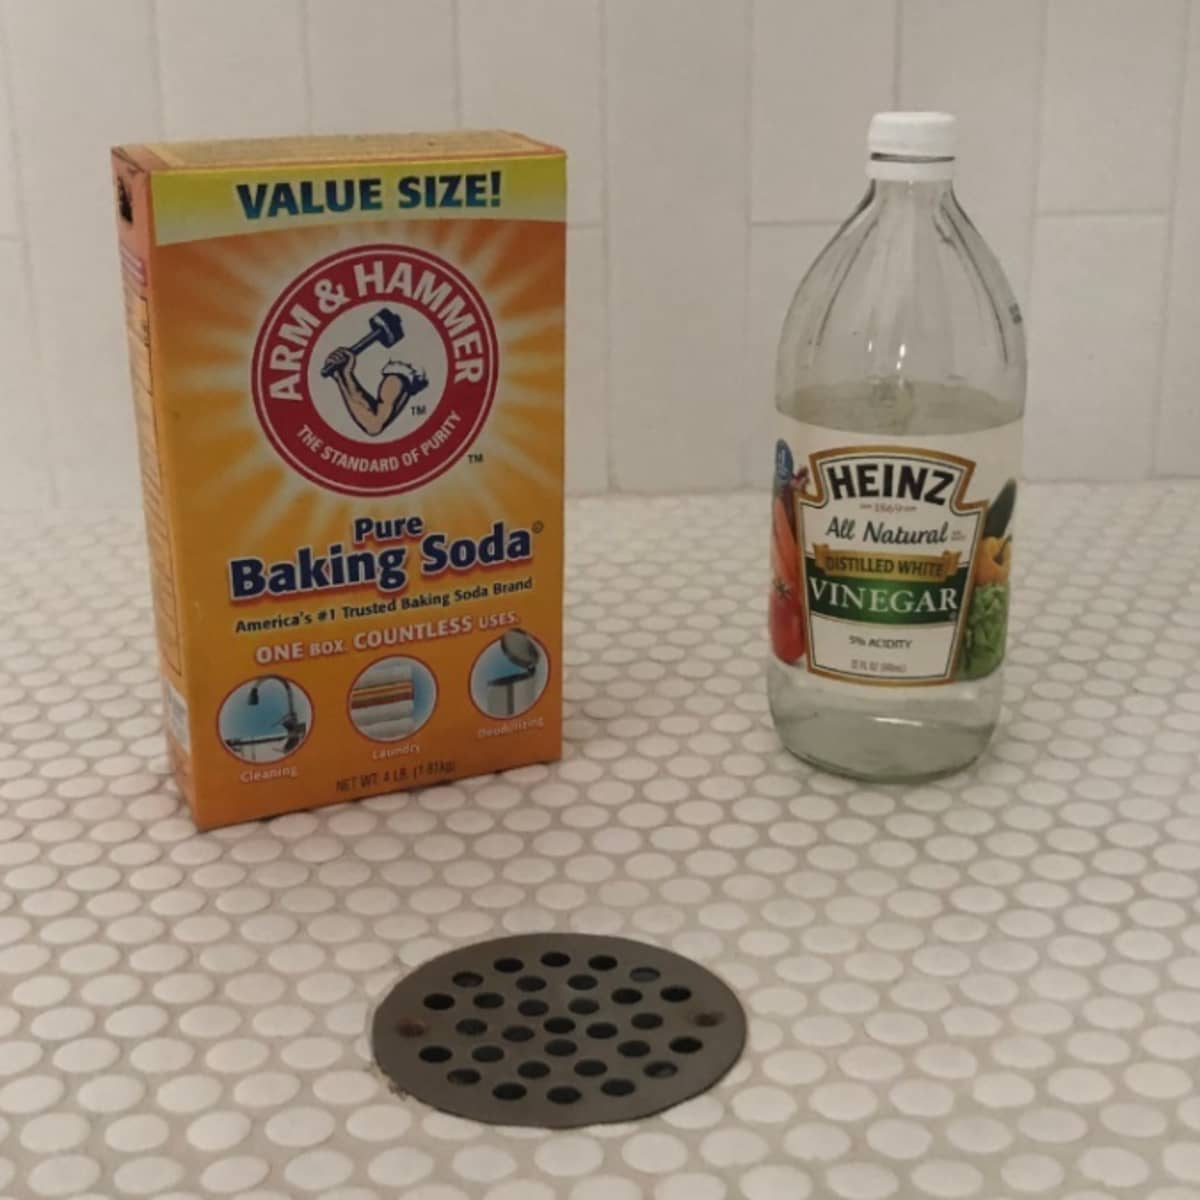 How to unclog a kitchen sink using baking soda and vinegar !! 